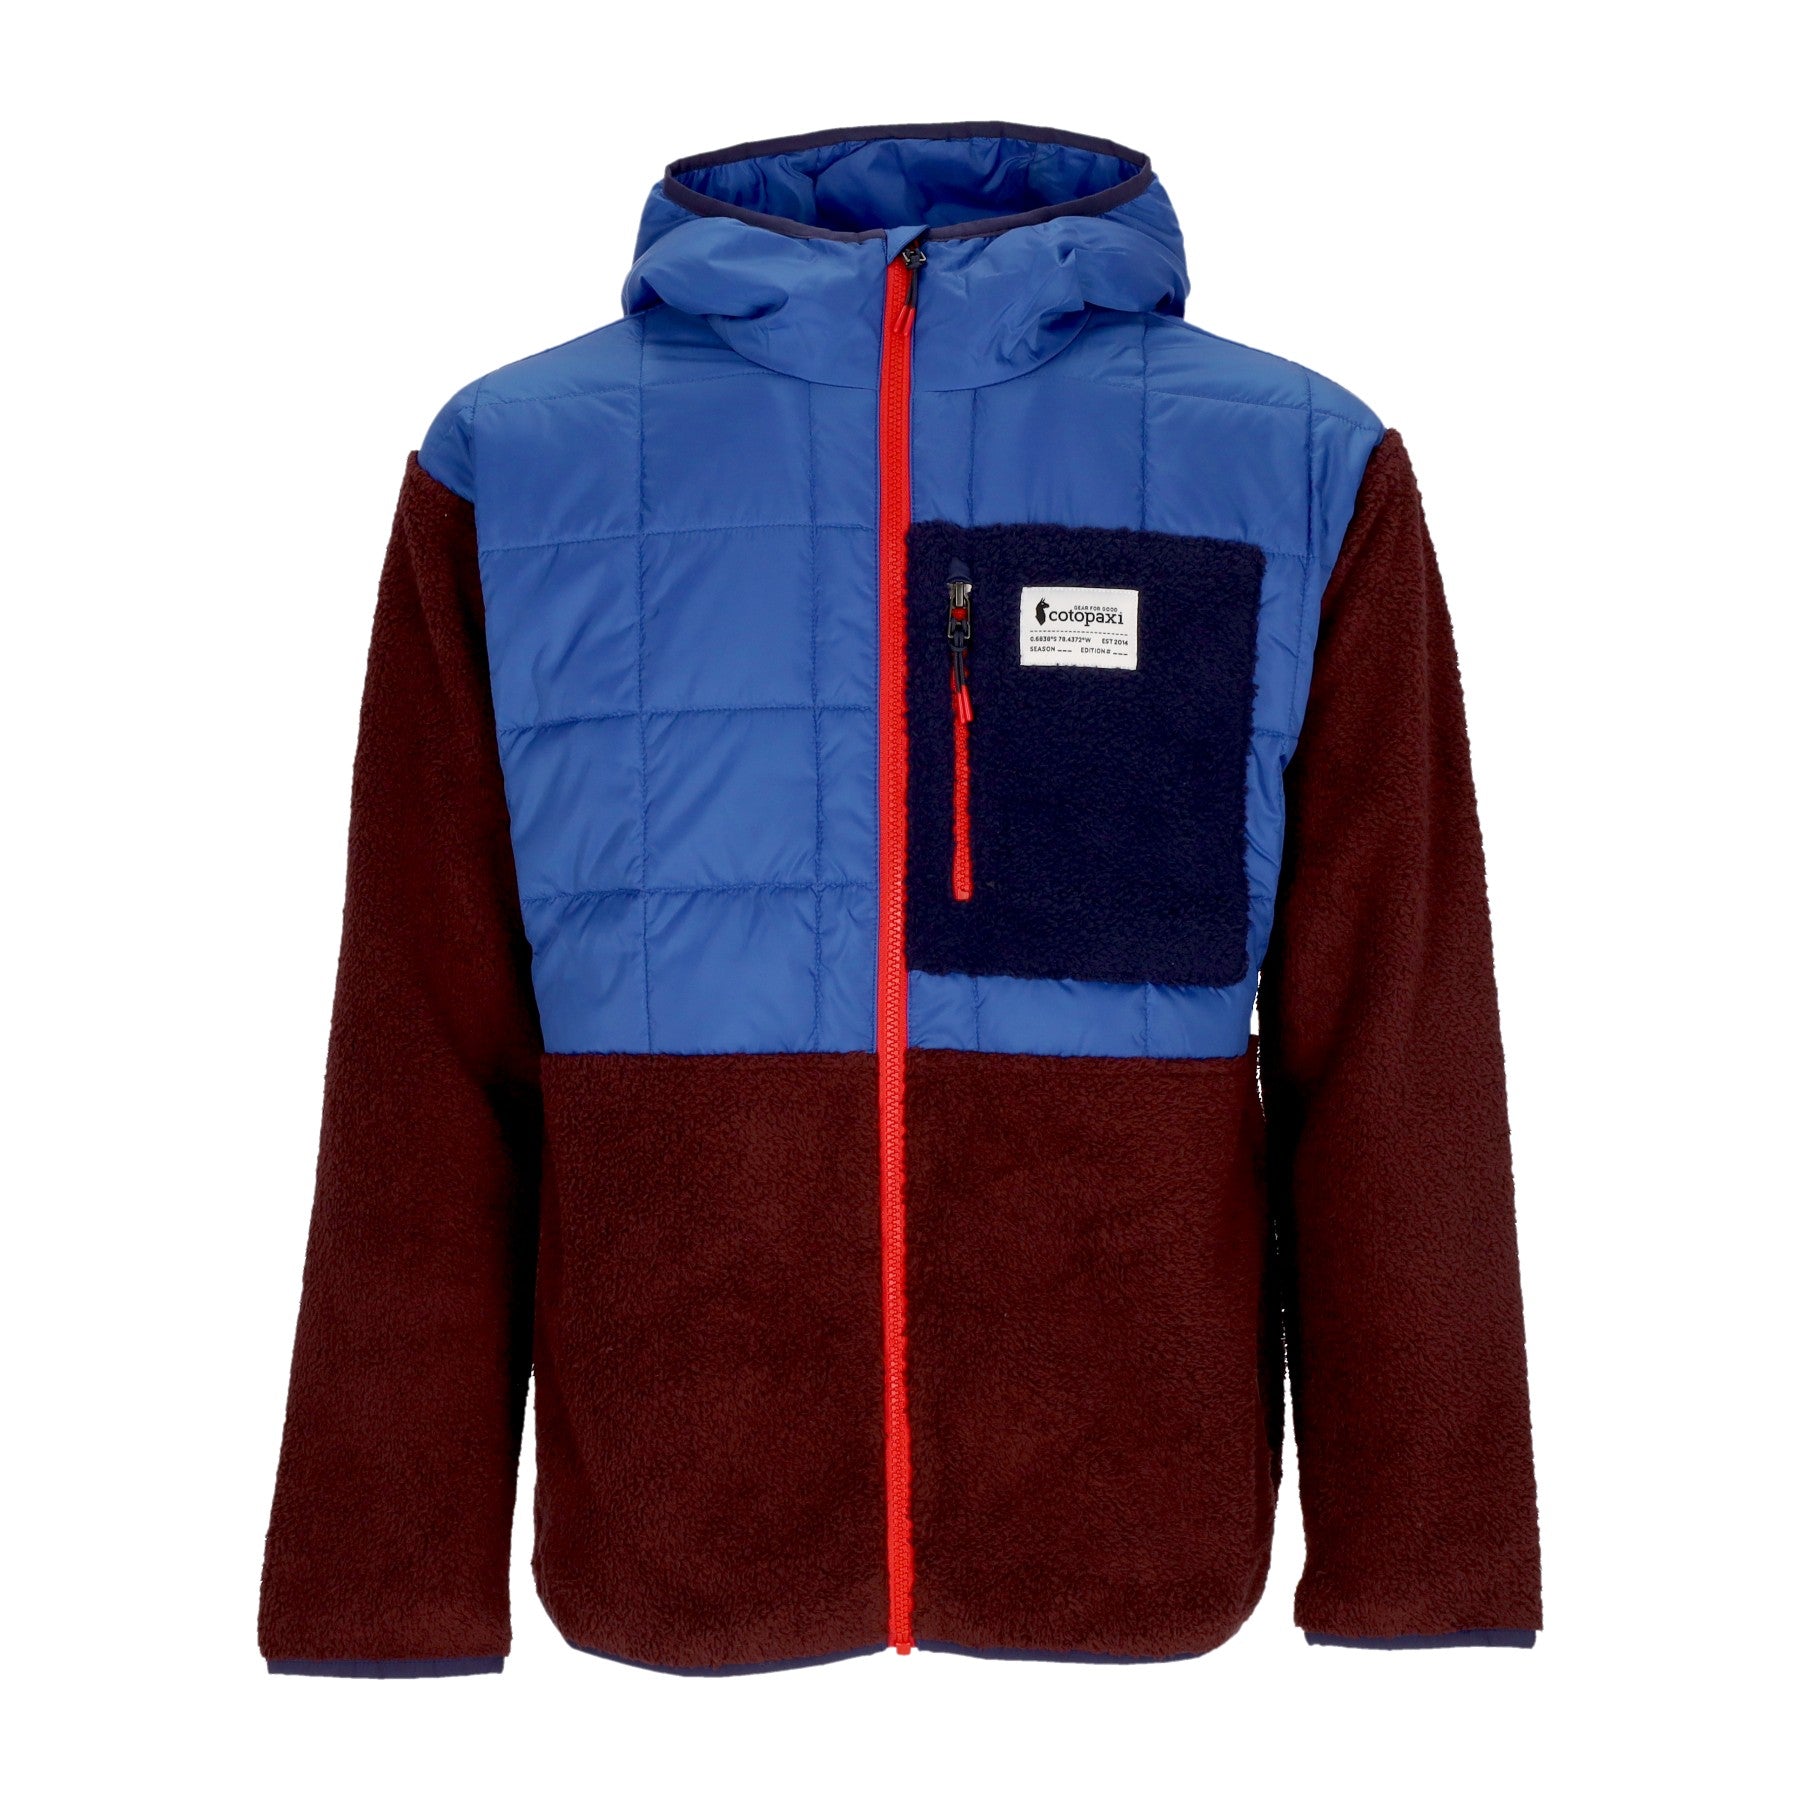 Cotopaxi, Orsetto Uomo Trico Hybrid Hooded Jacket, Blue Violet/wine